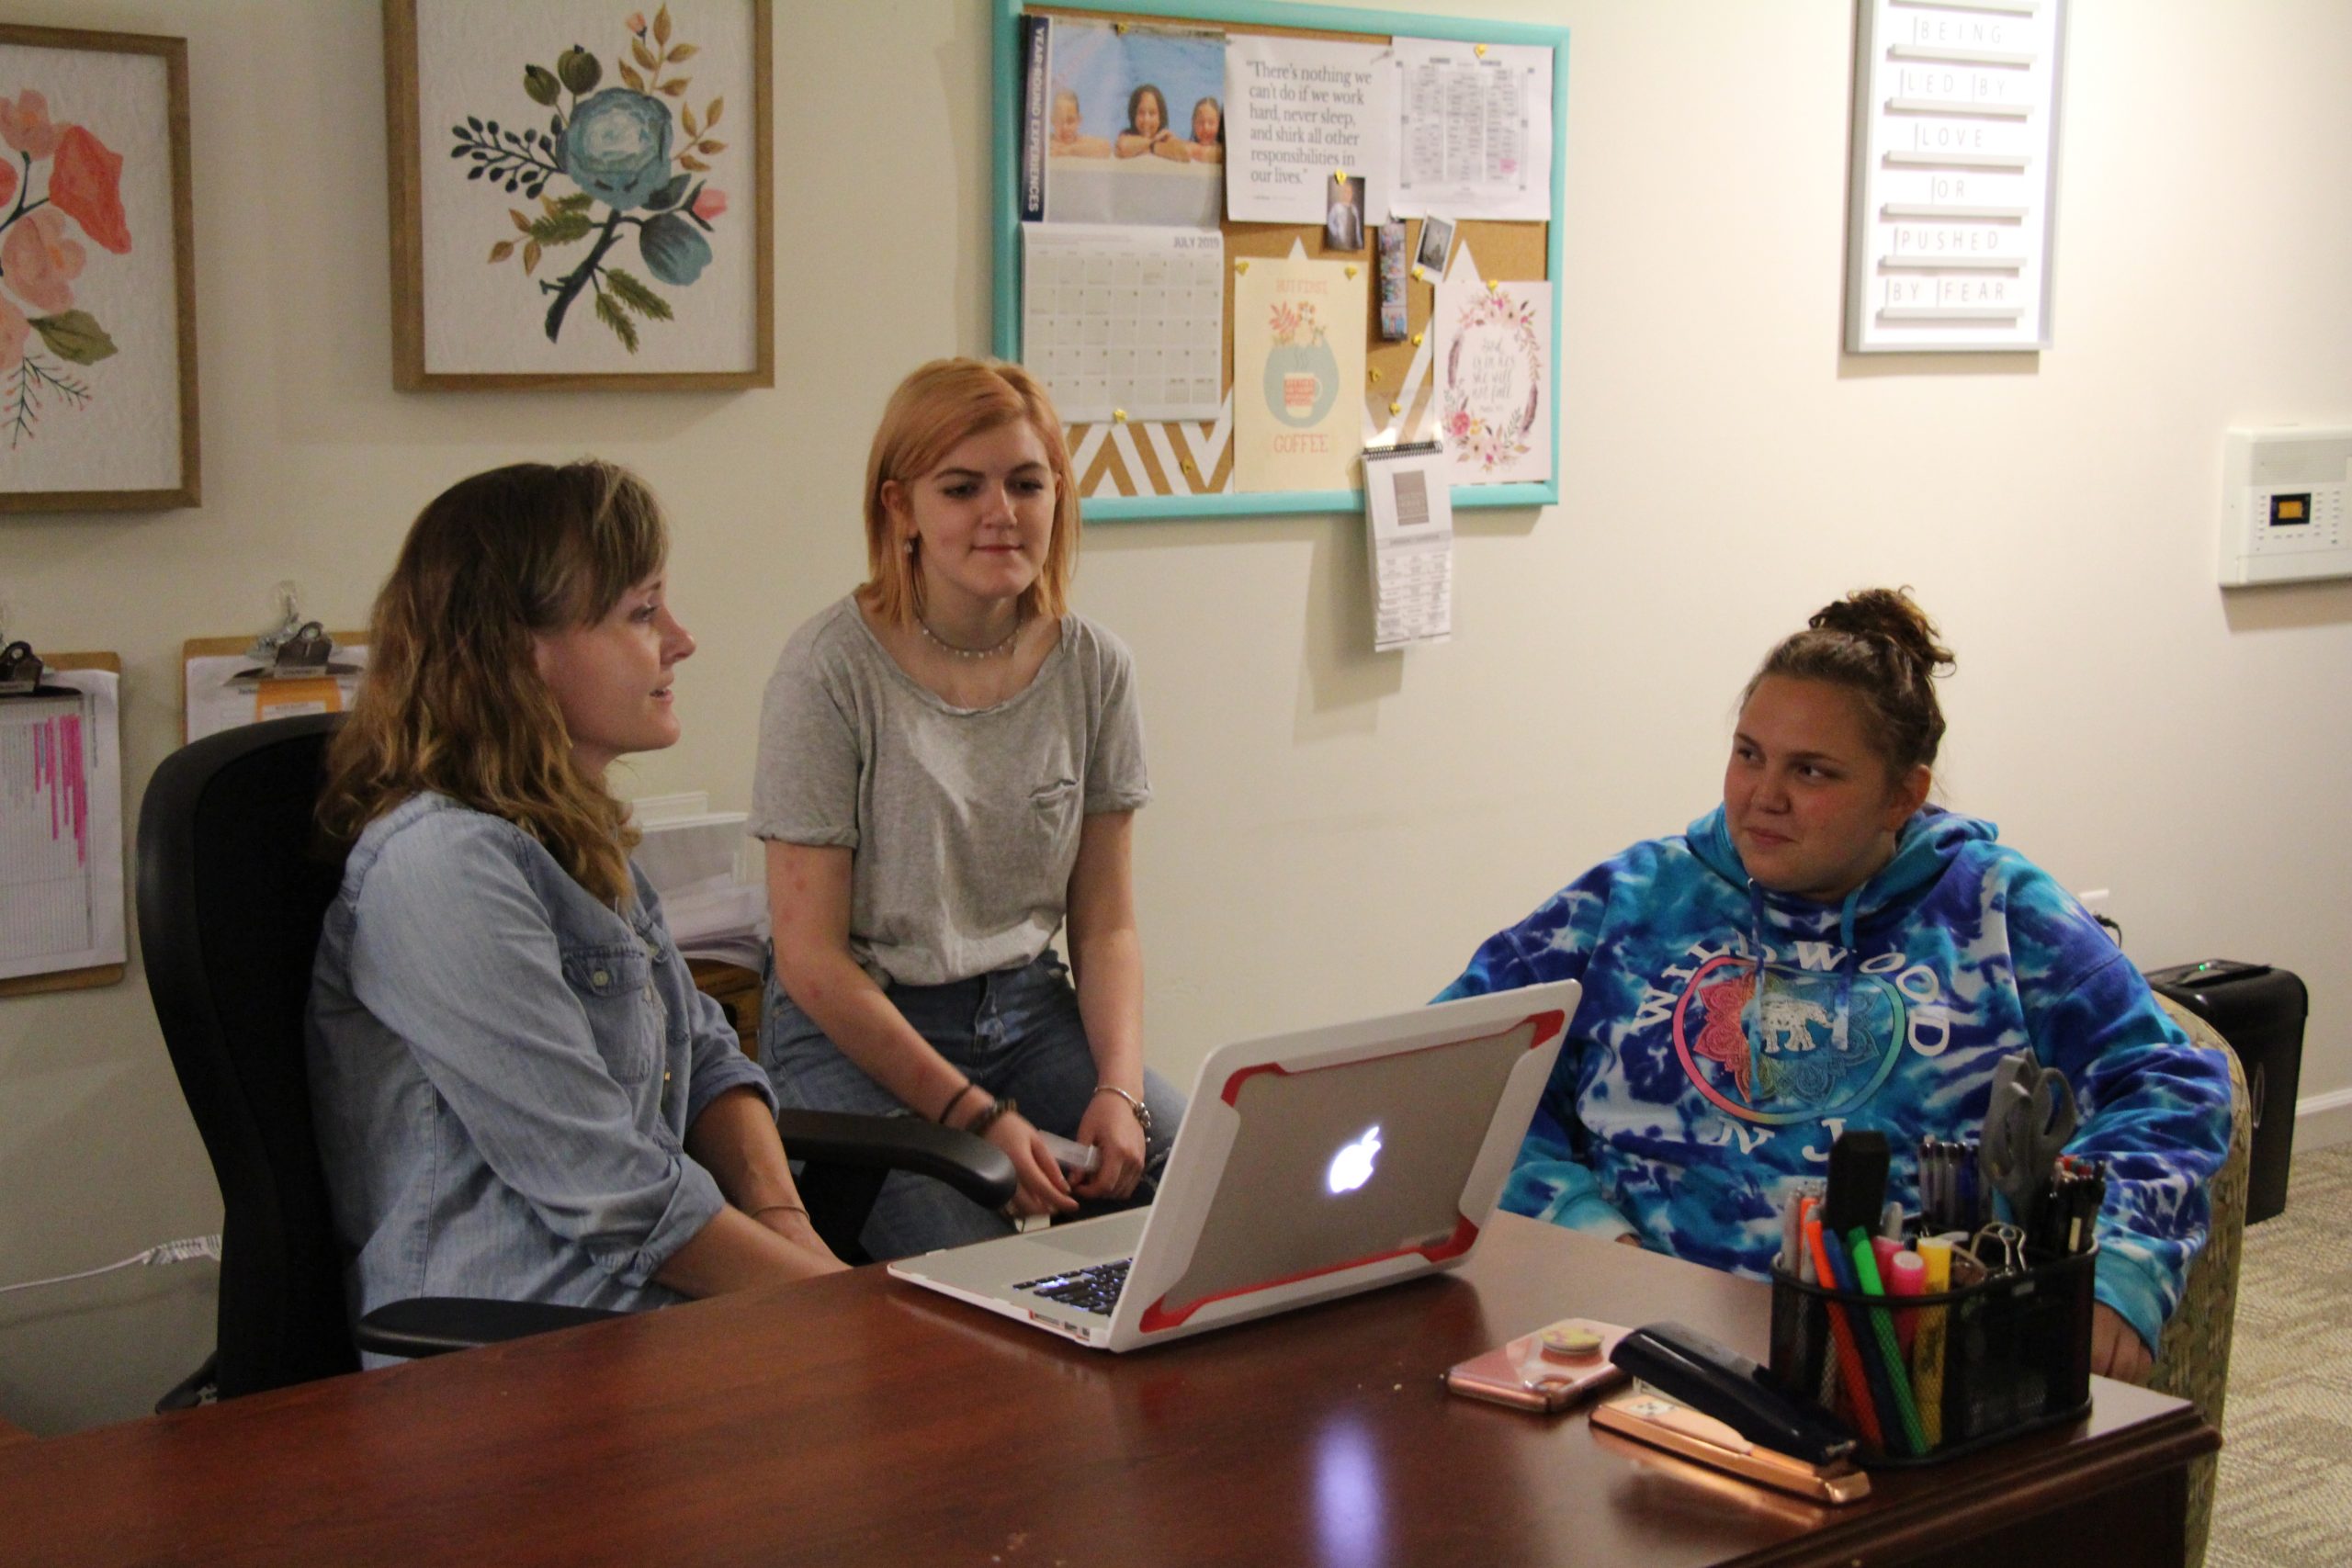 Milton Hershey School Transitional Living Coordinator, Lindsey Young, meets with students to plan activities in the TL.